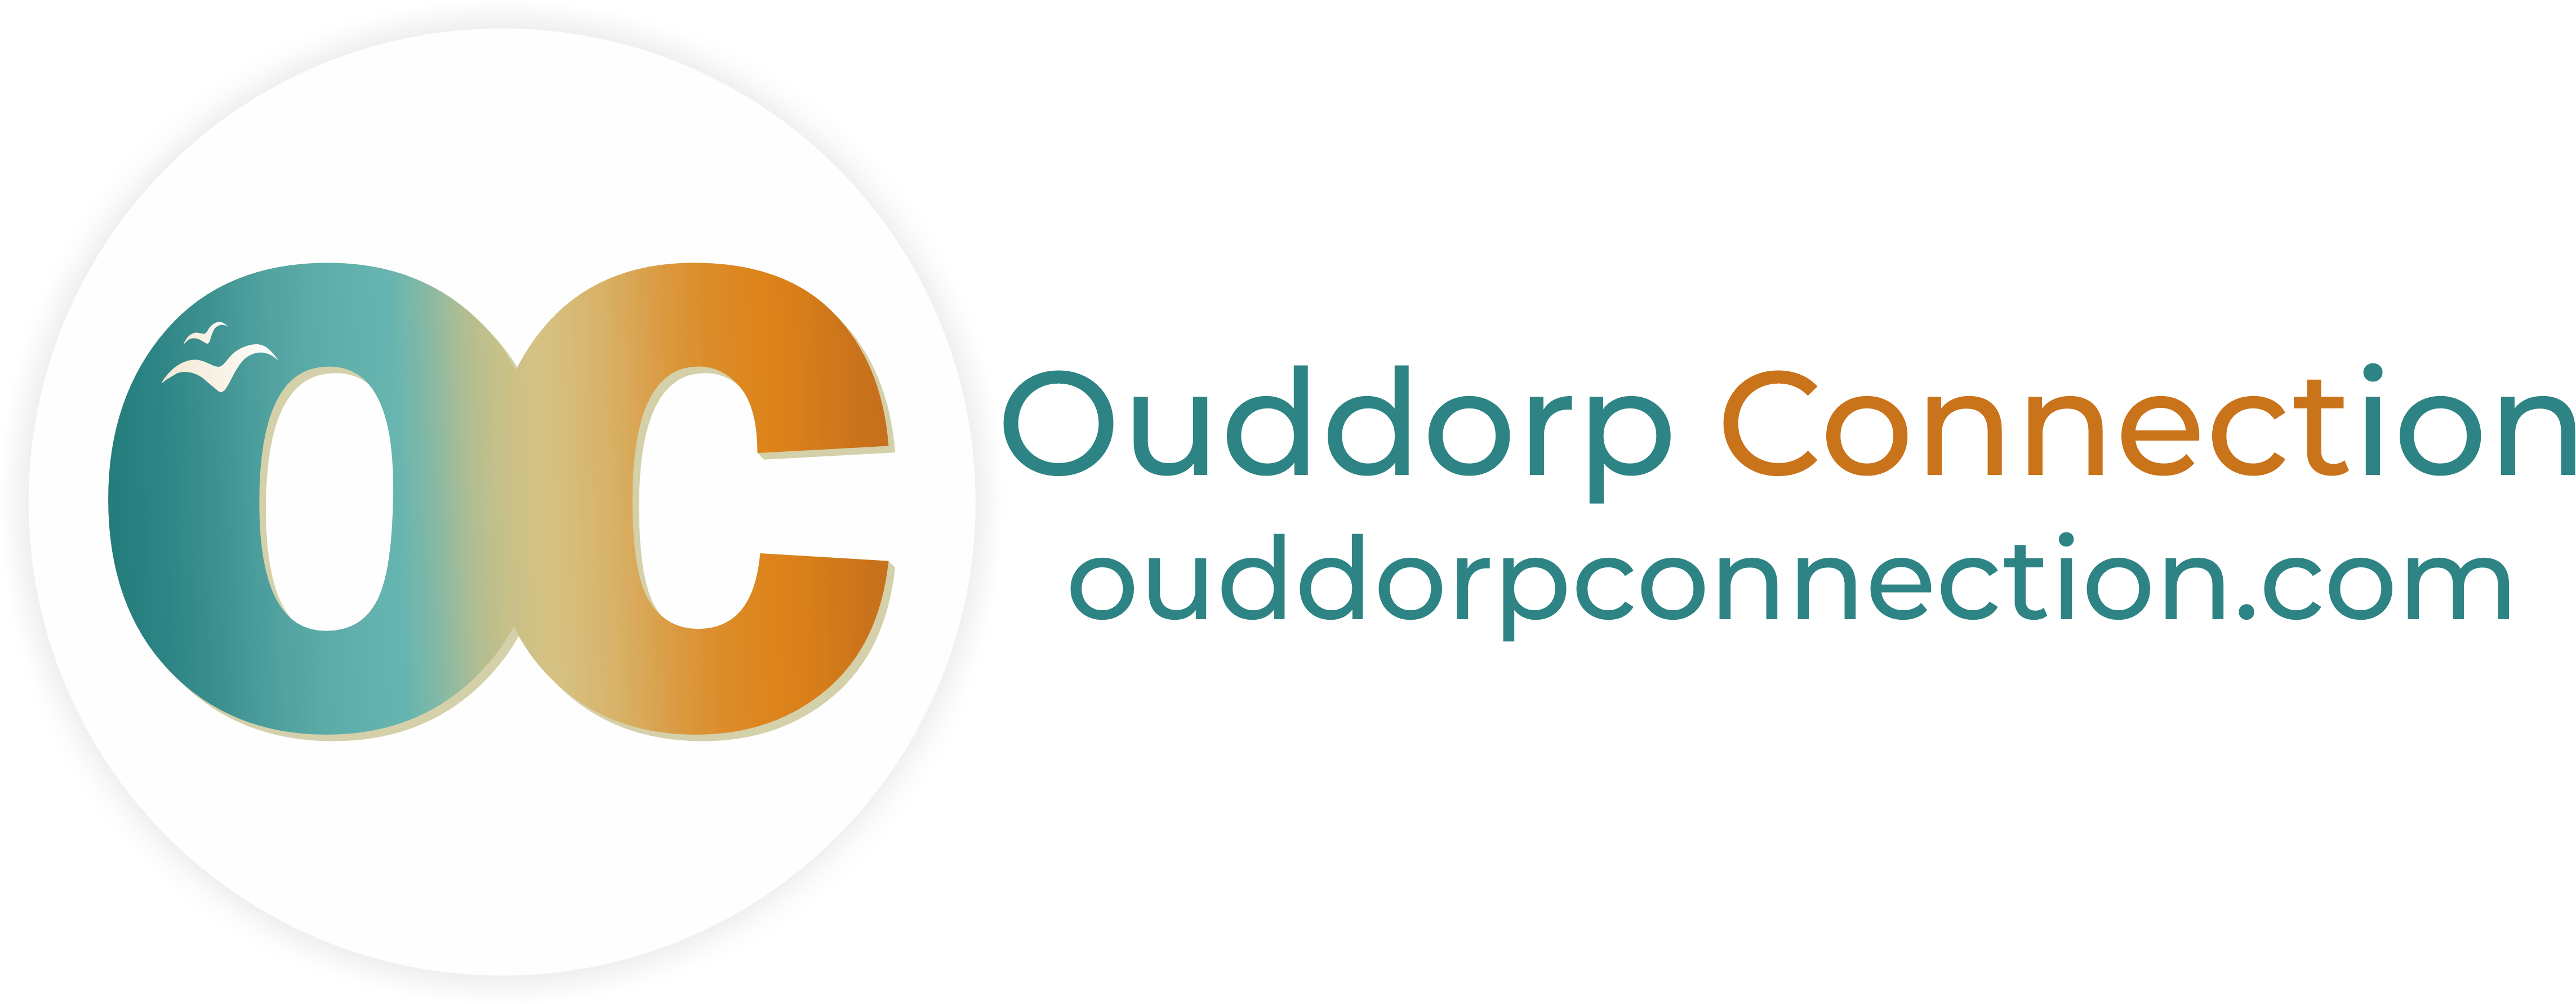 Ouddorp Connection